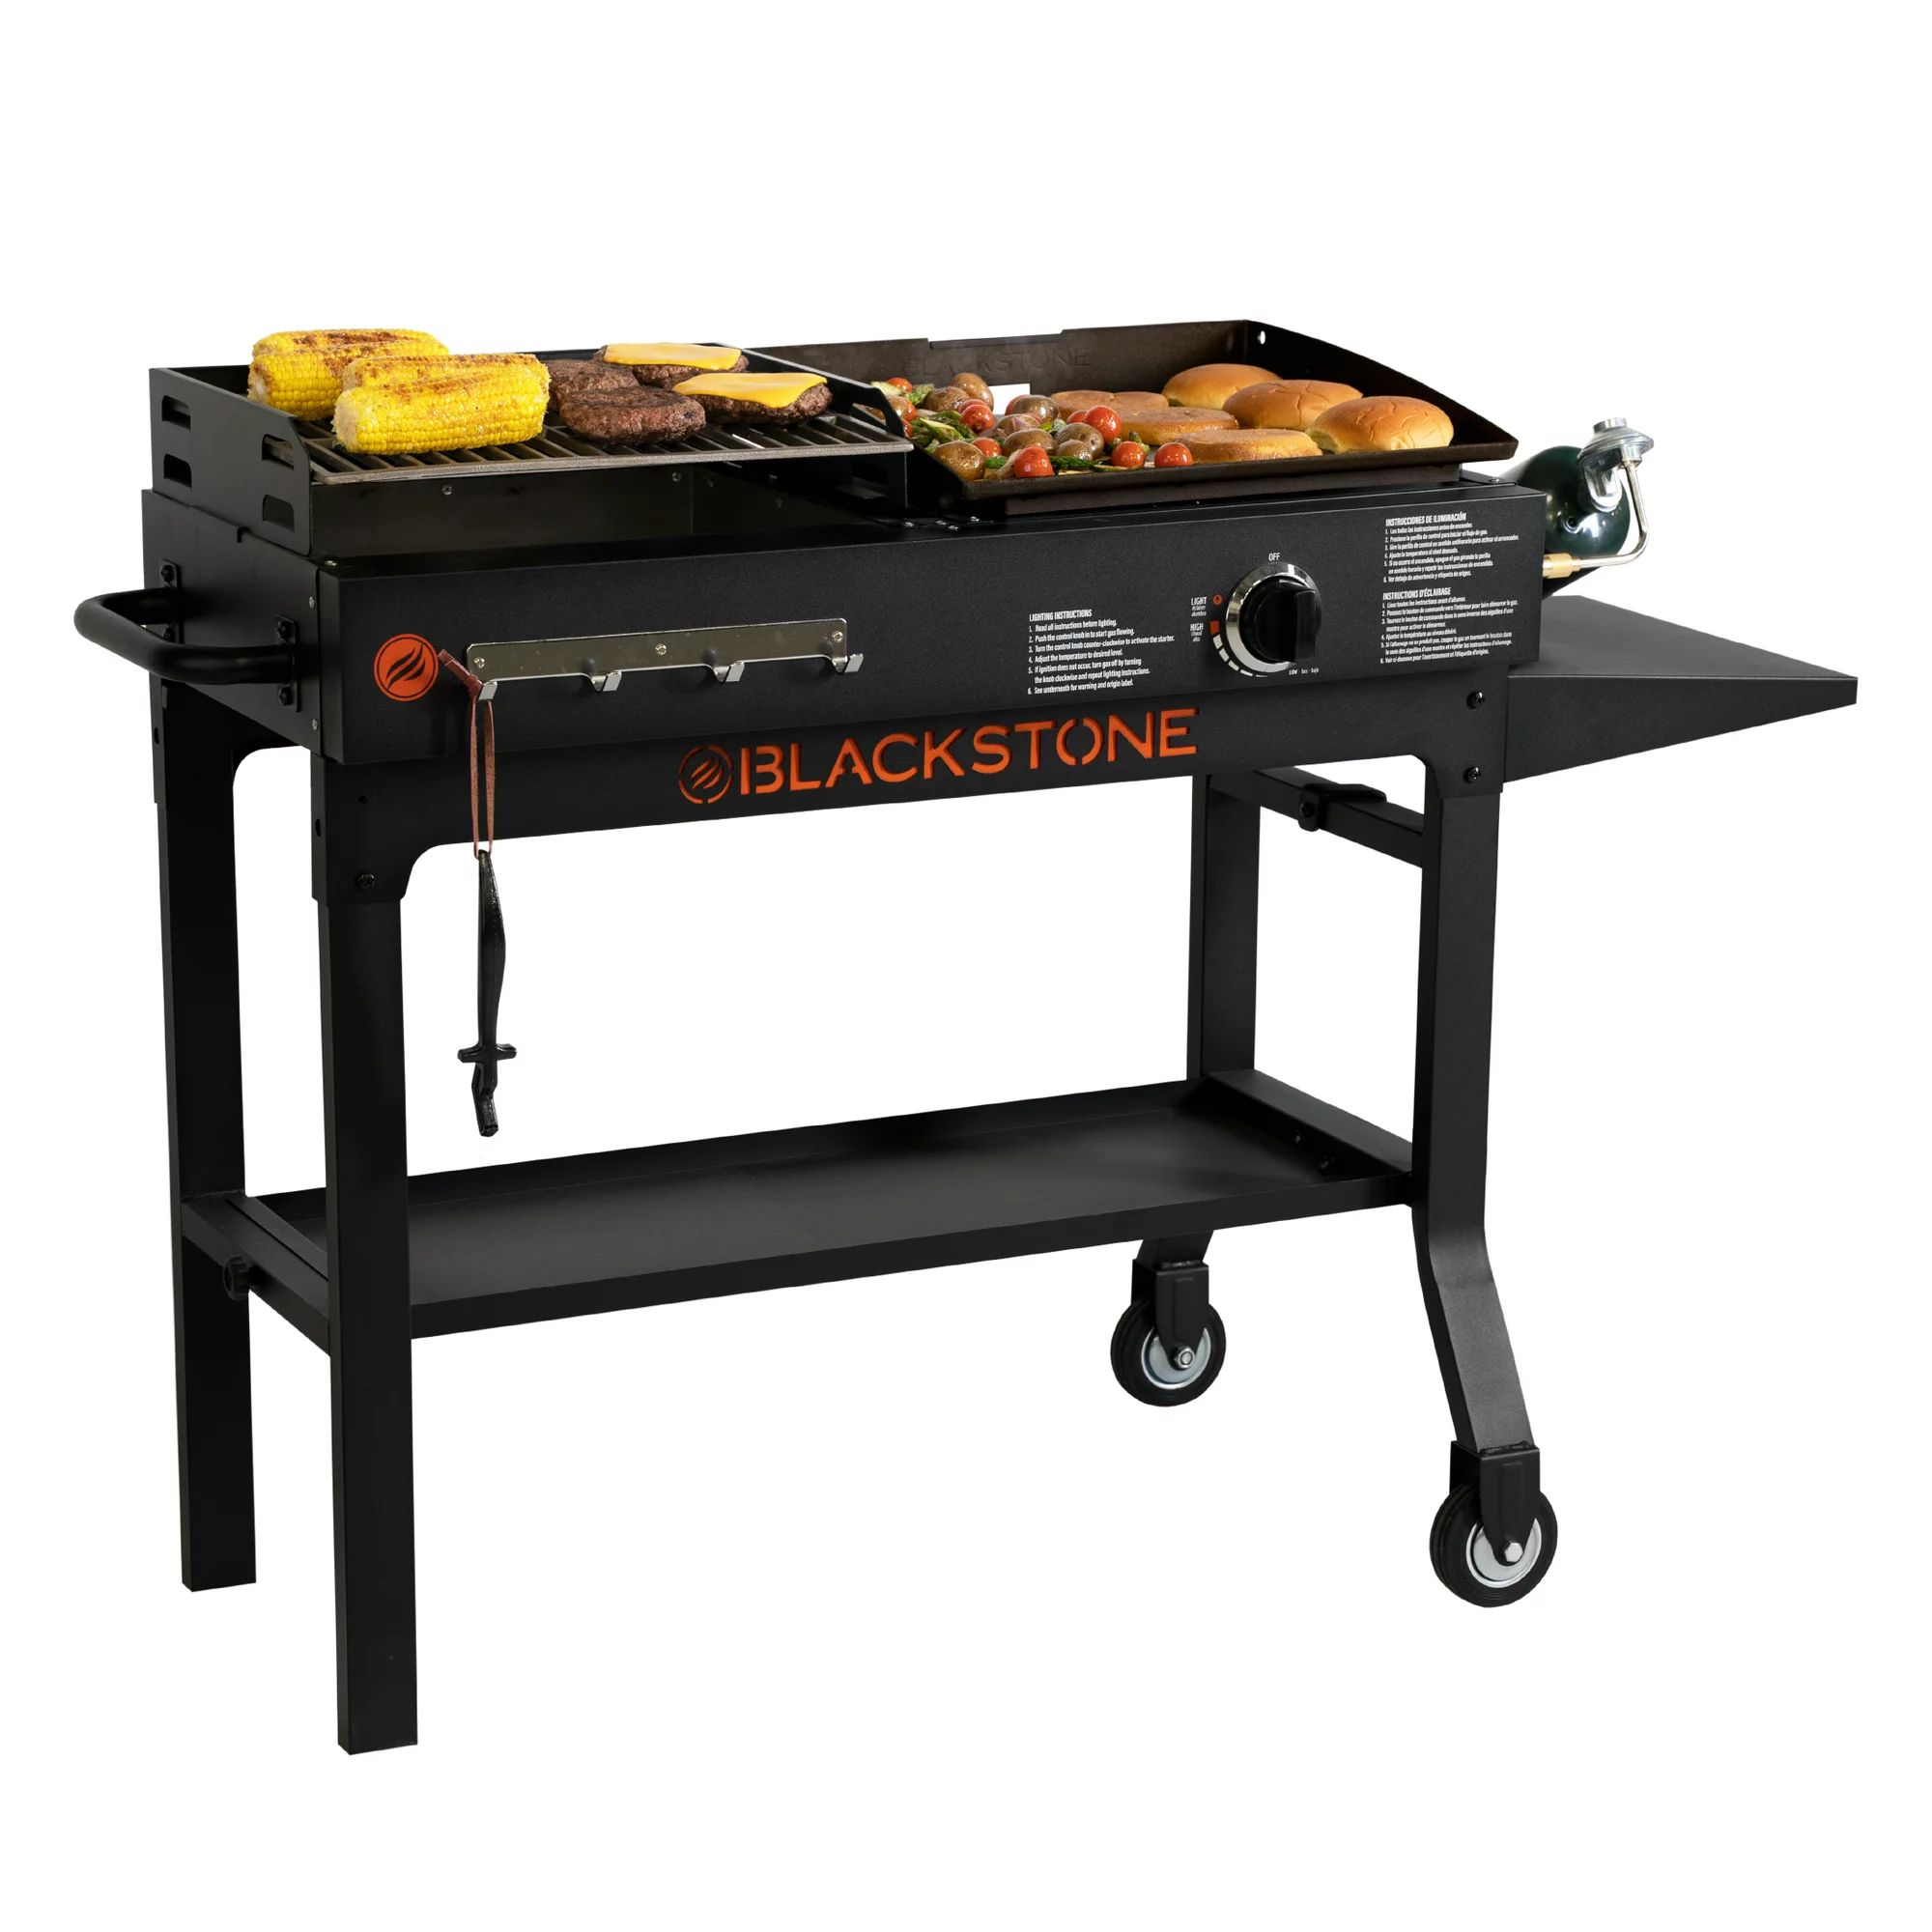 Blackstone Duo 17" Propane Griddle and Charcoal Grill Combo | Walmart (US)